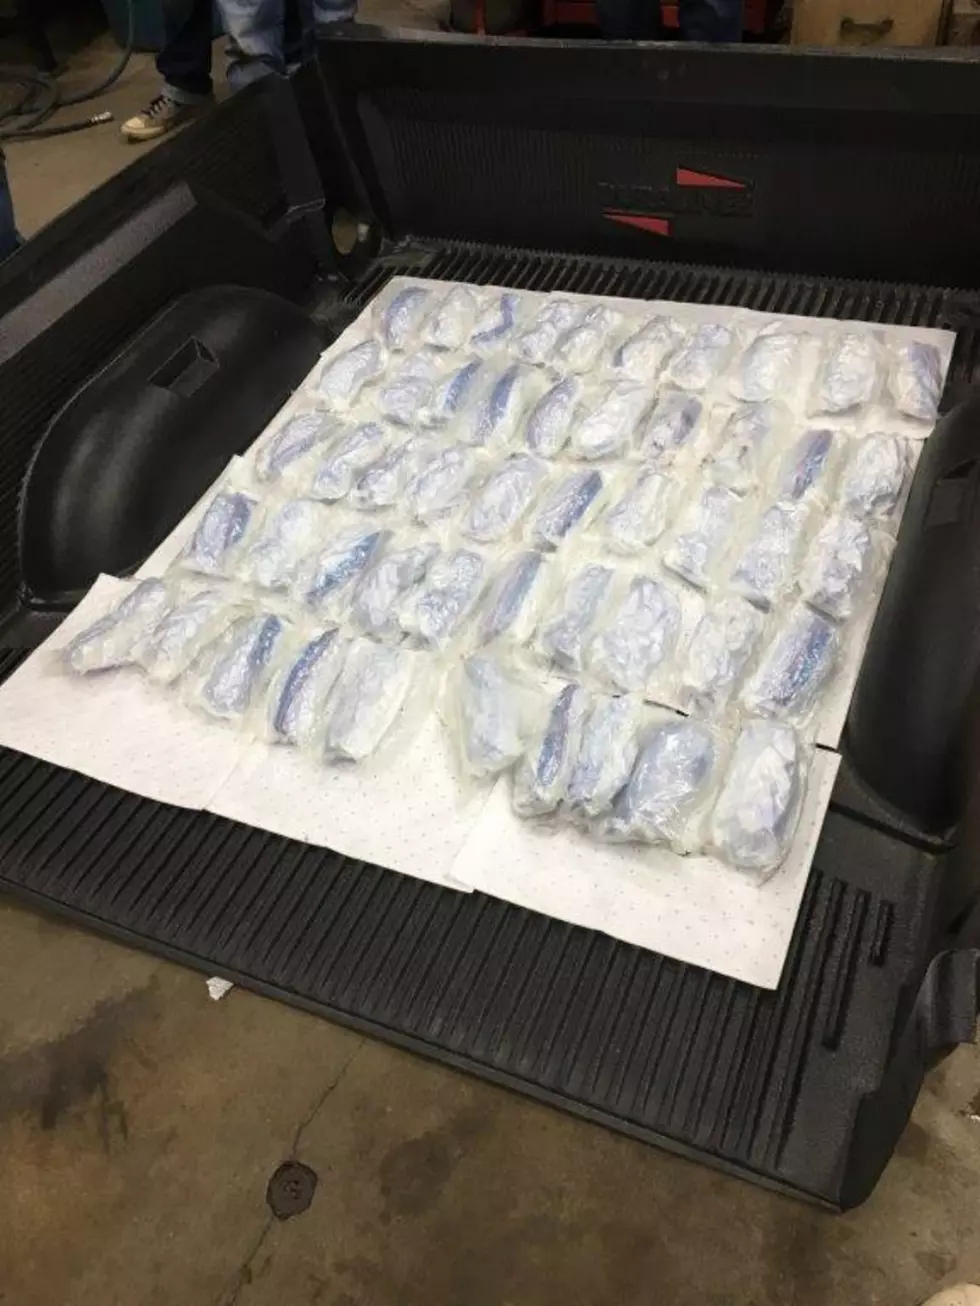 Rochester Meth Bust ‘Largest Ever’ in Southeast Minnesota